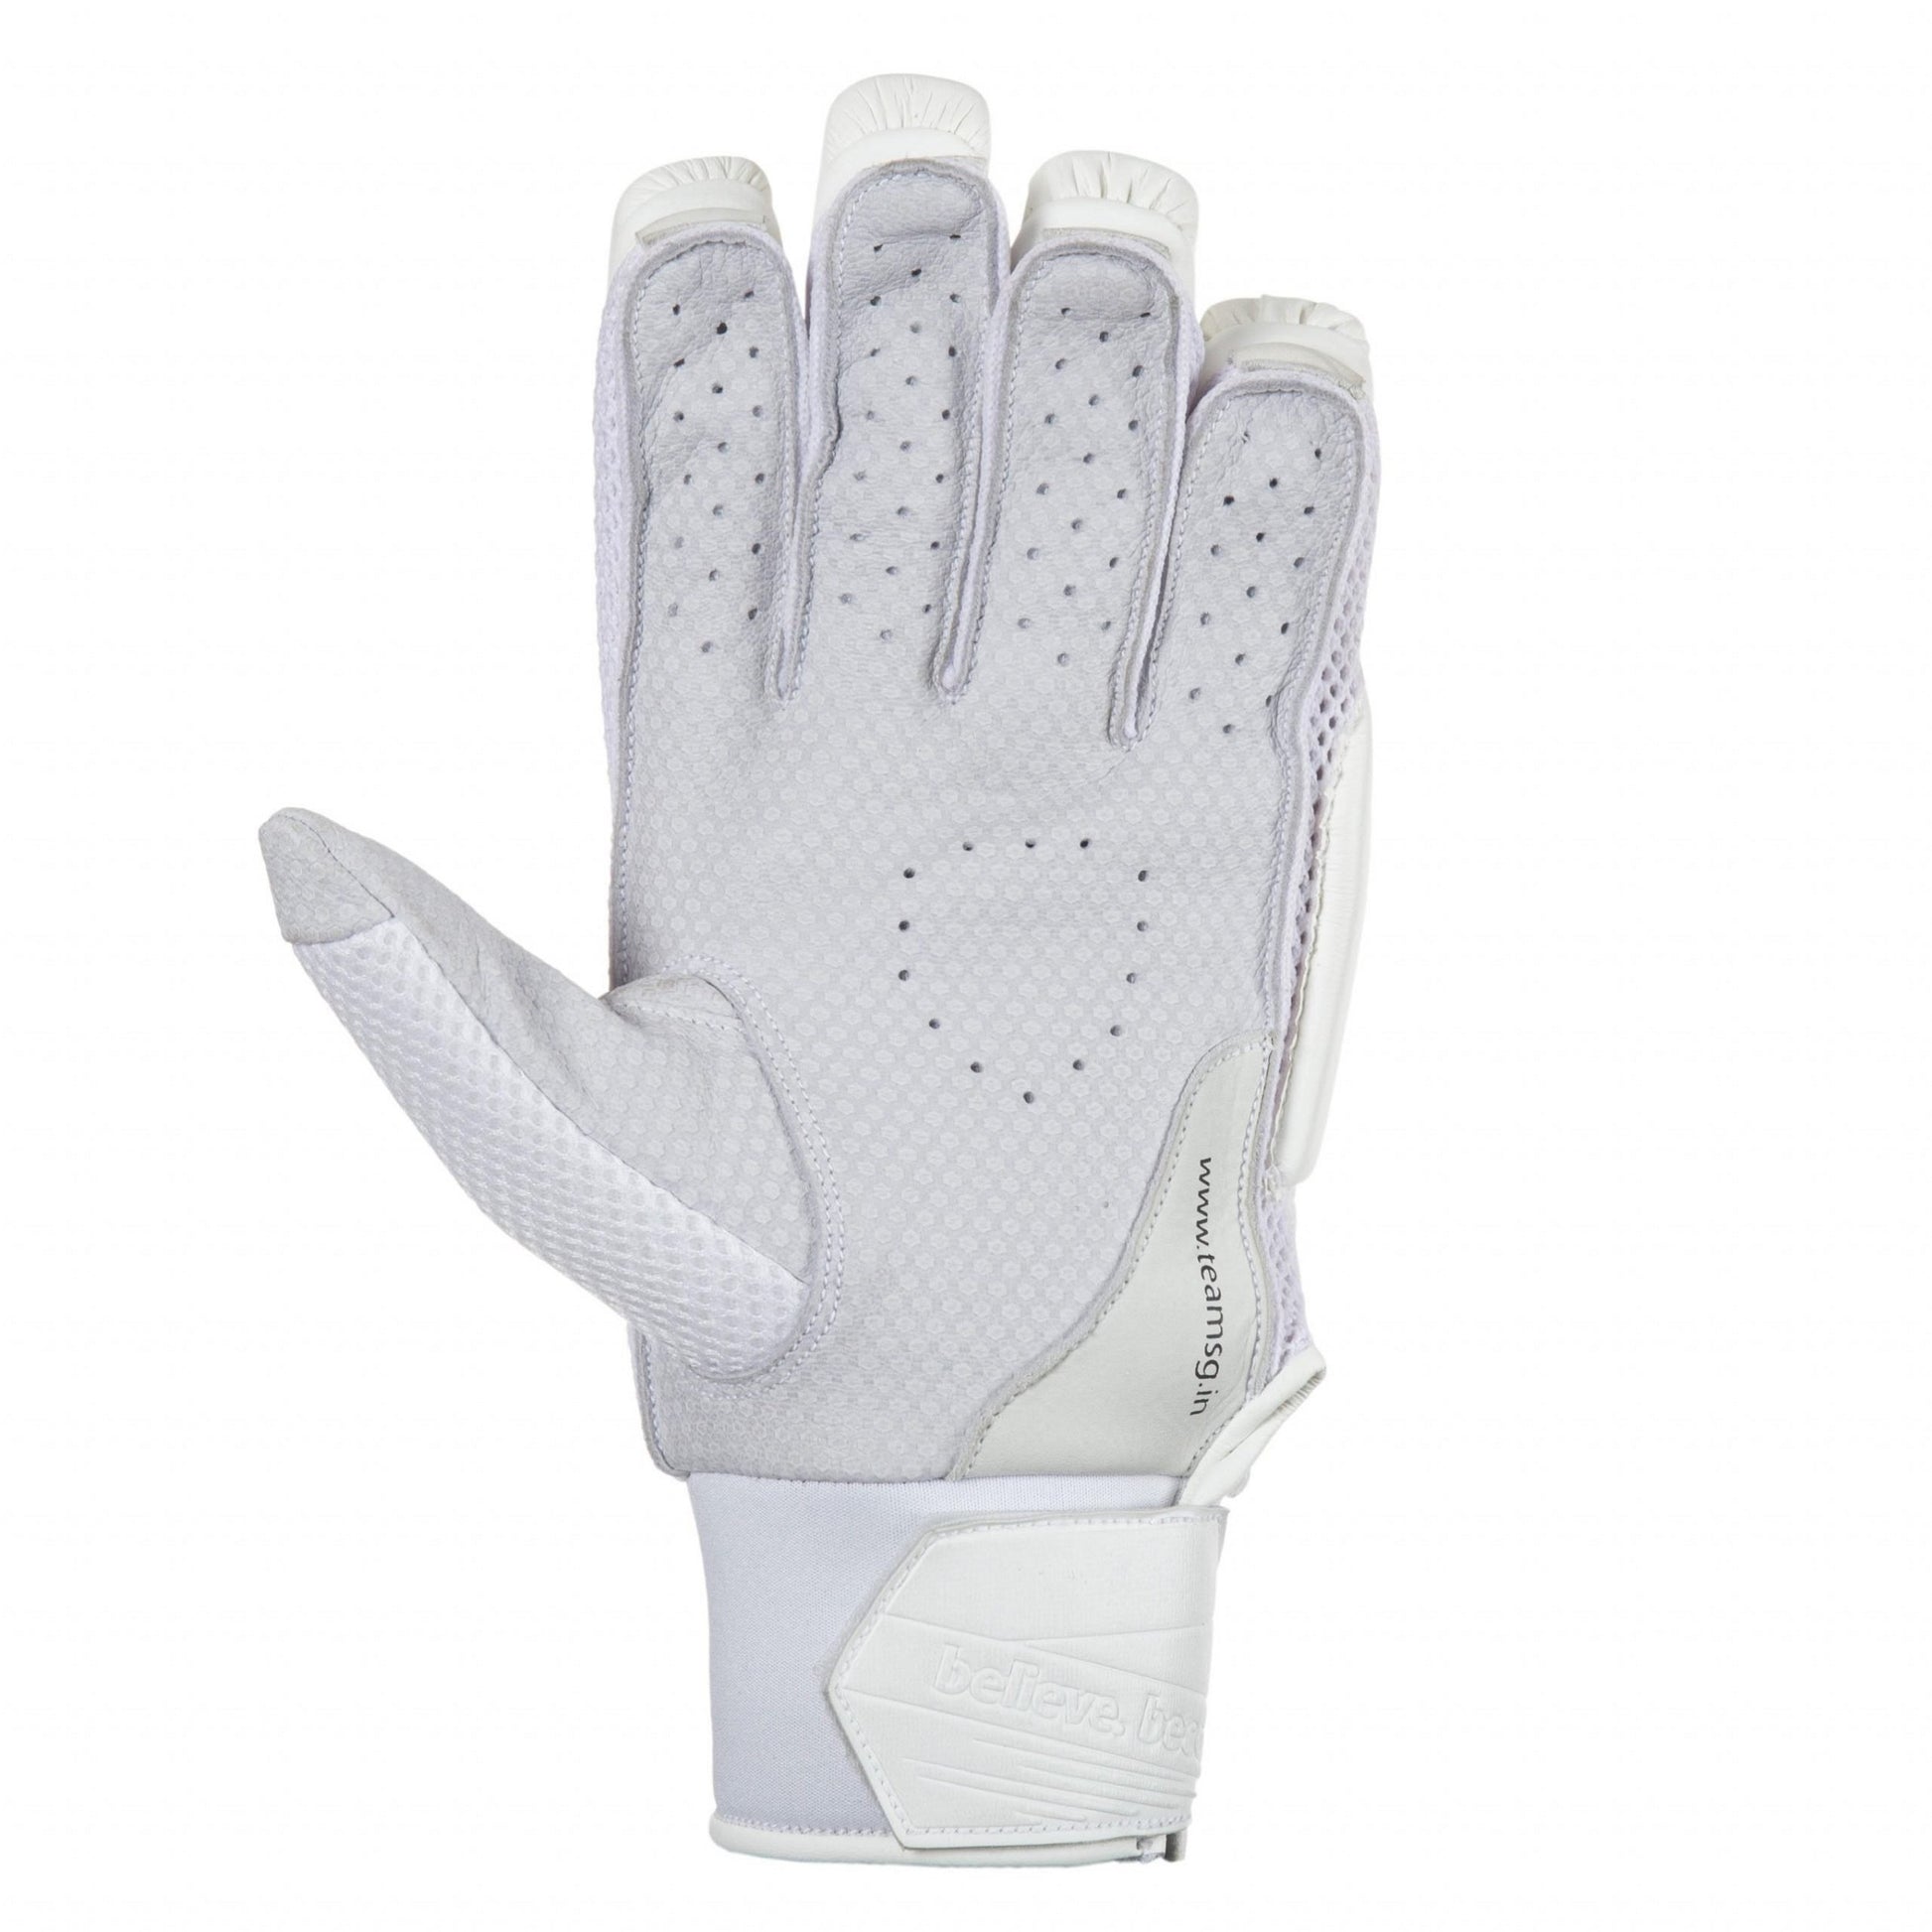 SG Hilite White Batting Gloves with High Quality Sheep Leather